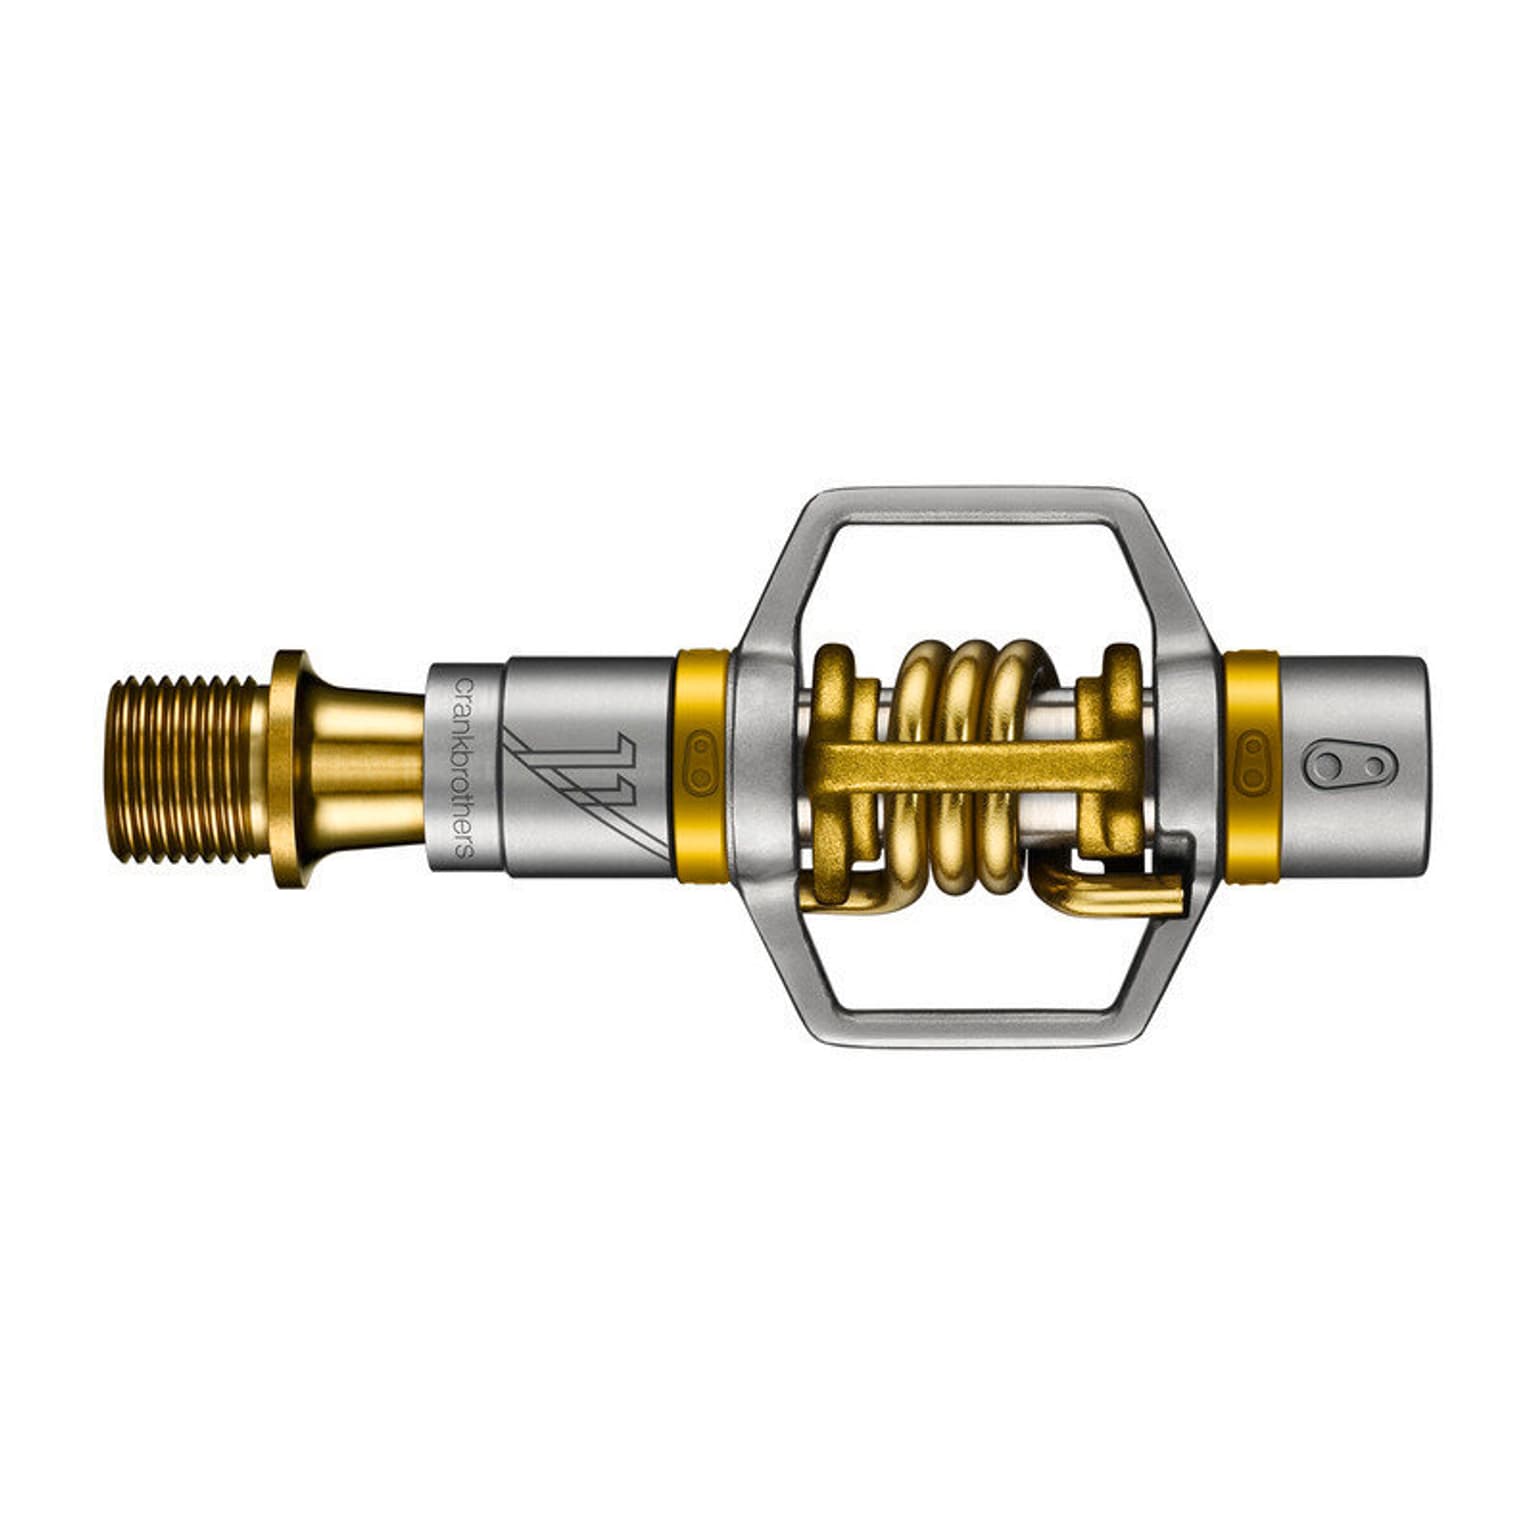 crankbrothers crankbrothers Pedal Egg Beater 11 Pedale 1